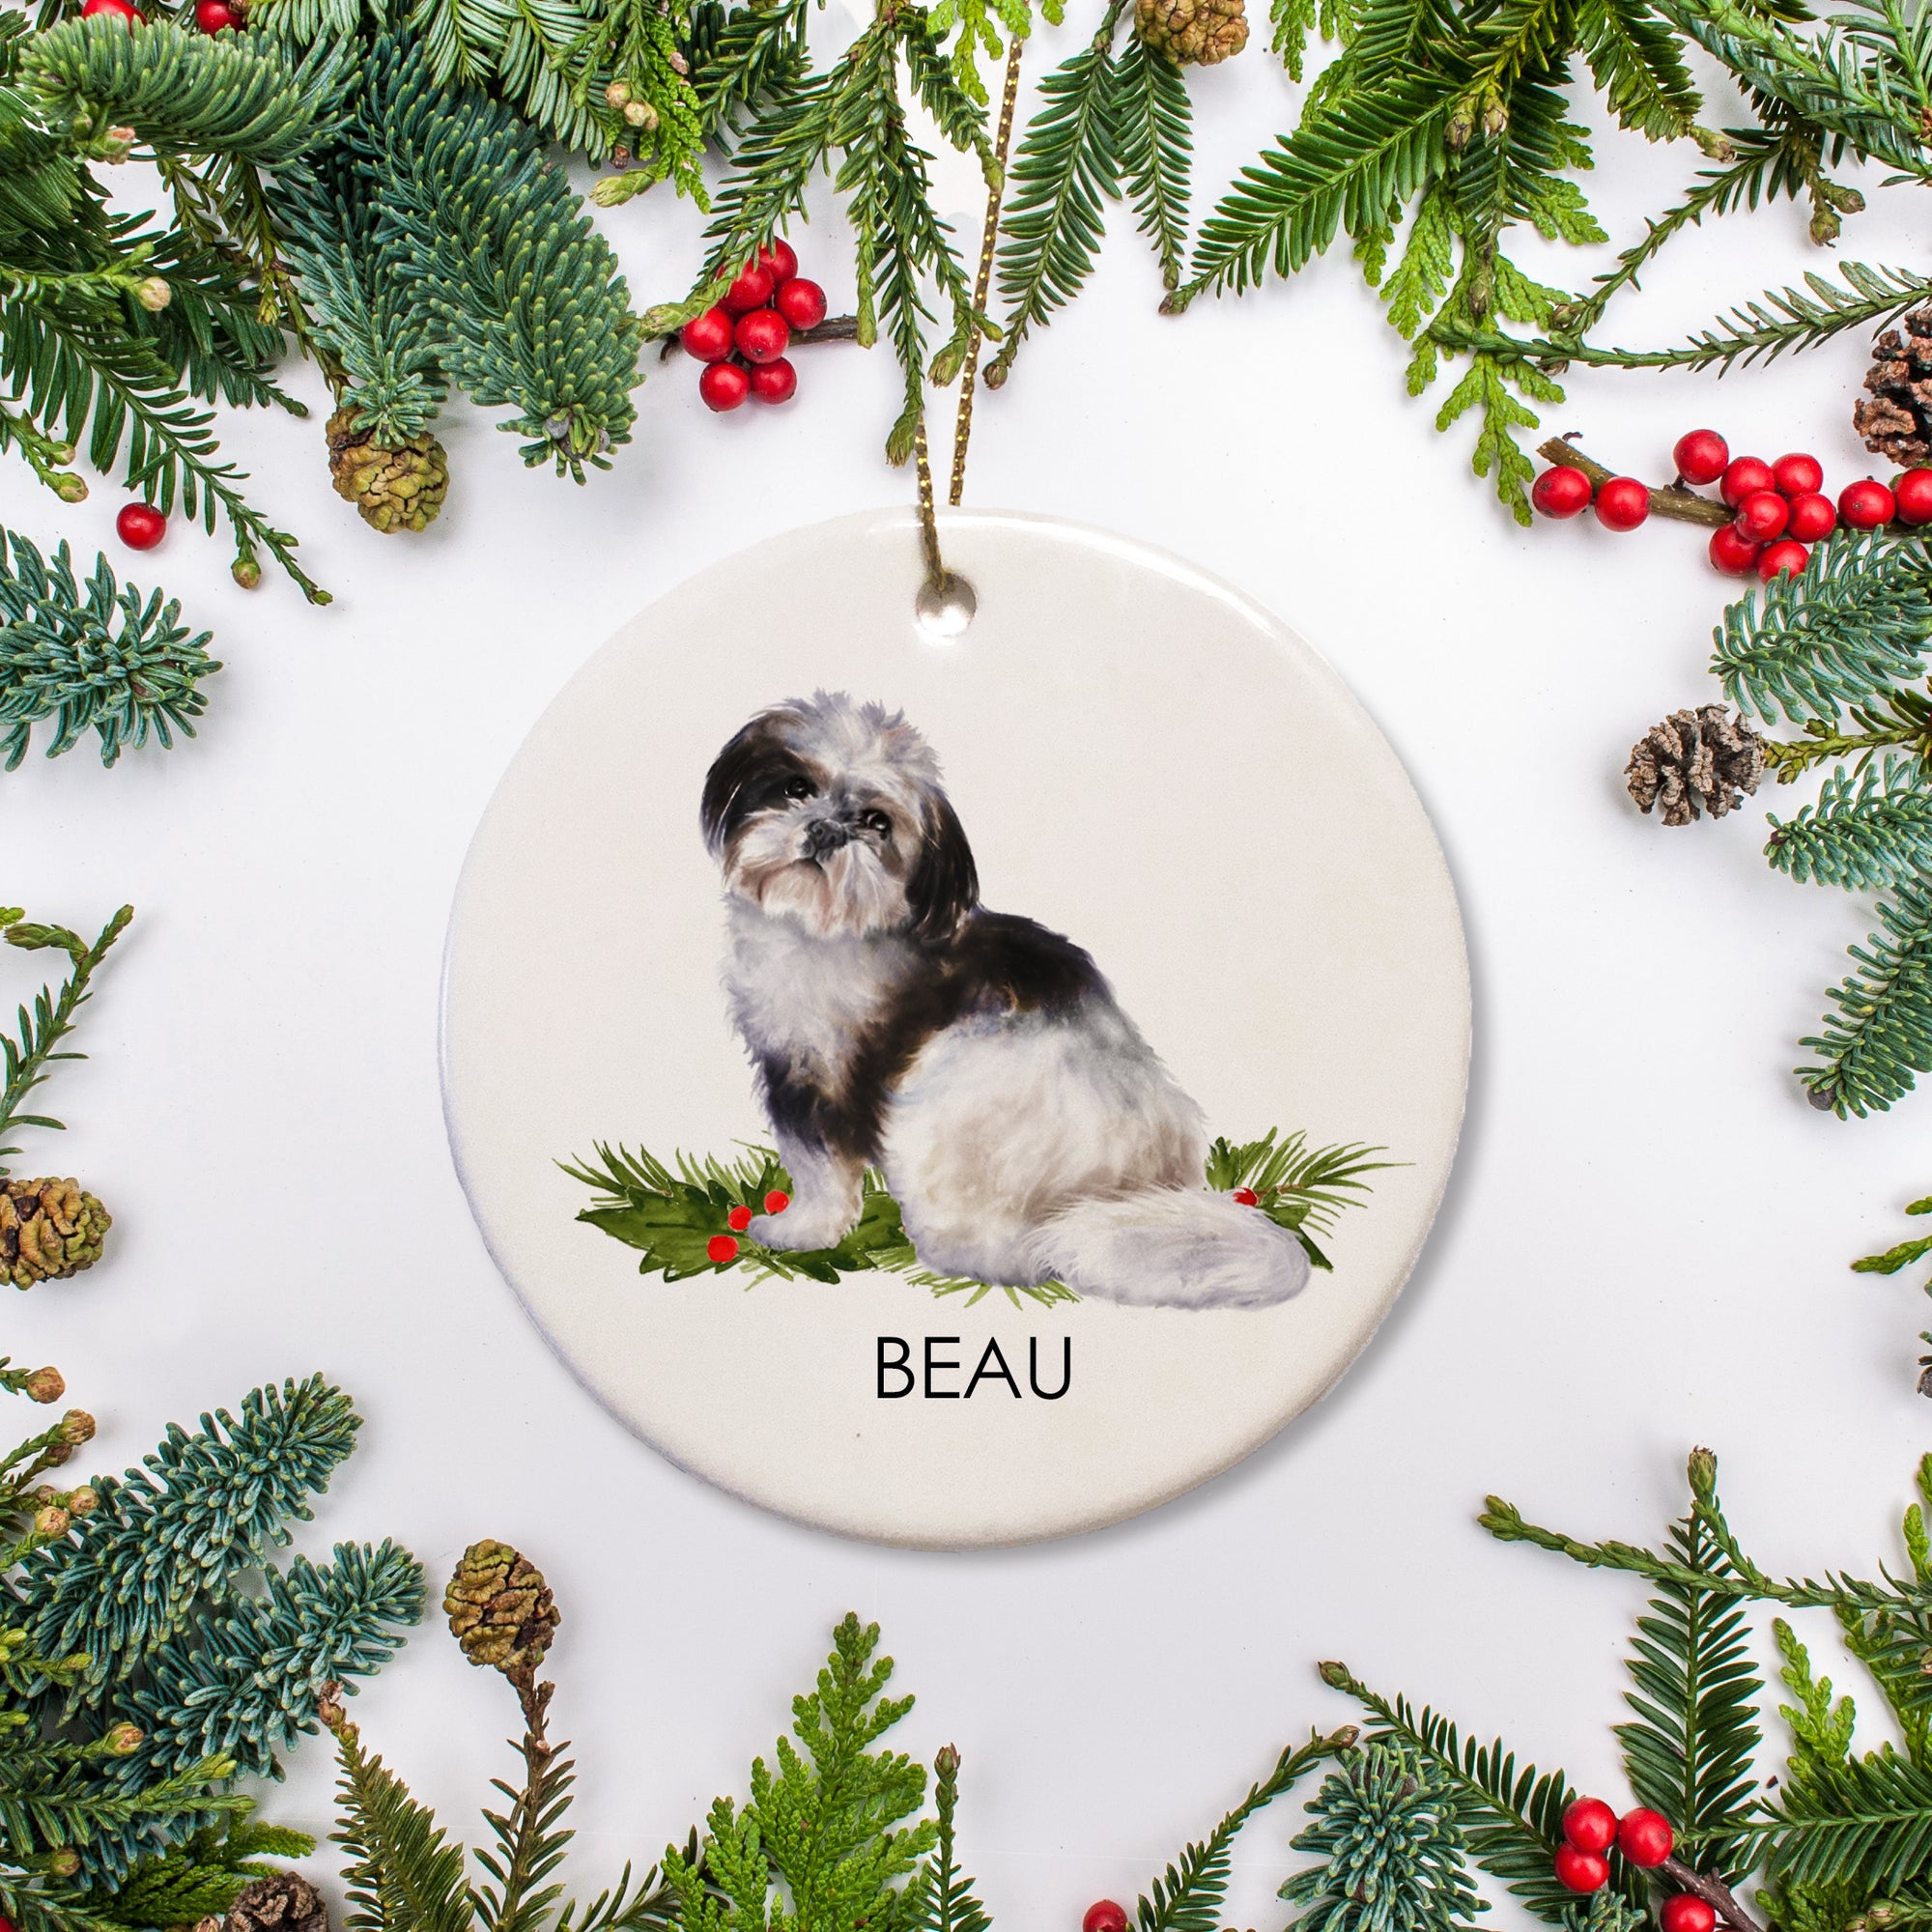 Personalized Shih Tzu Christmas ornament, featuring a black and white dog on a bed of holly, ceramic ornament with a gold hanging string